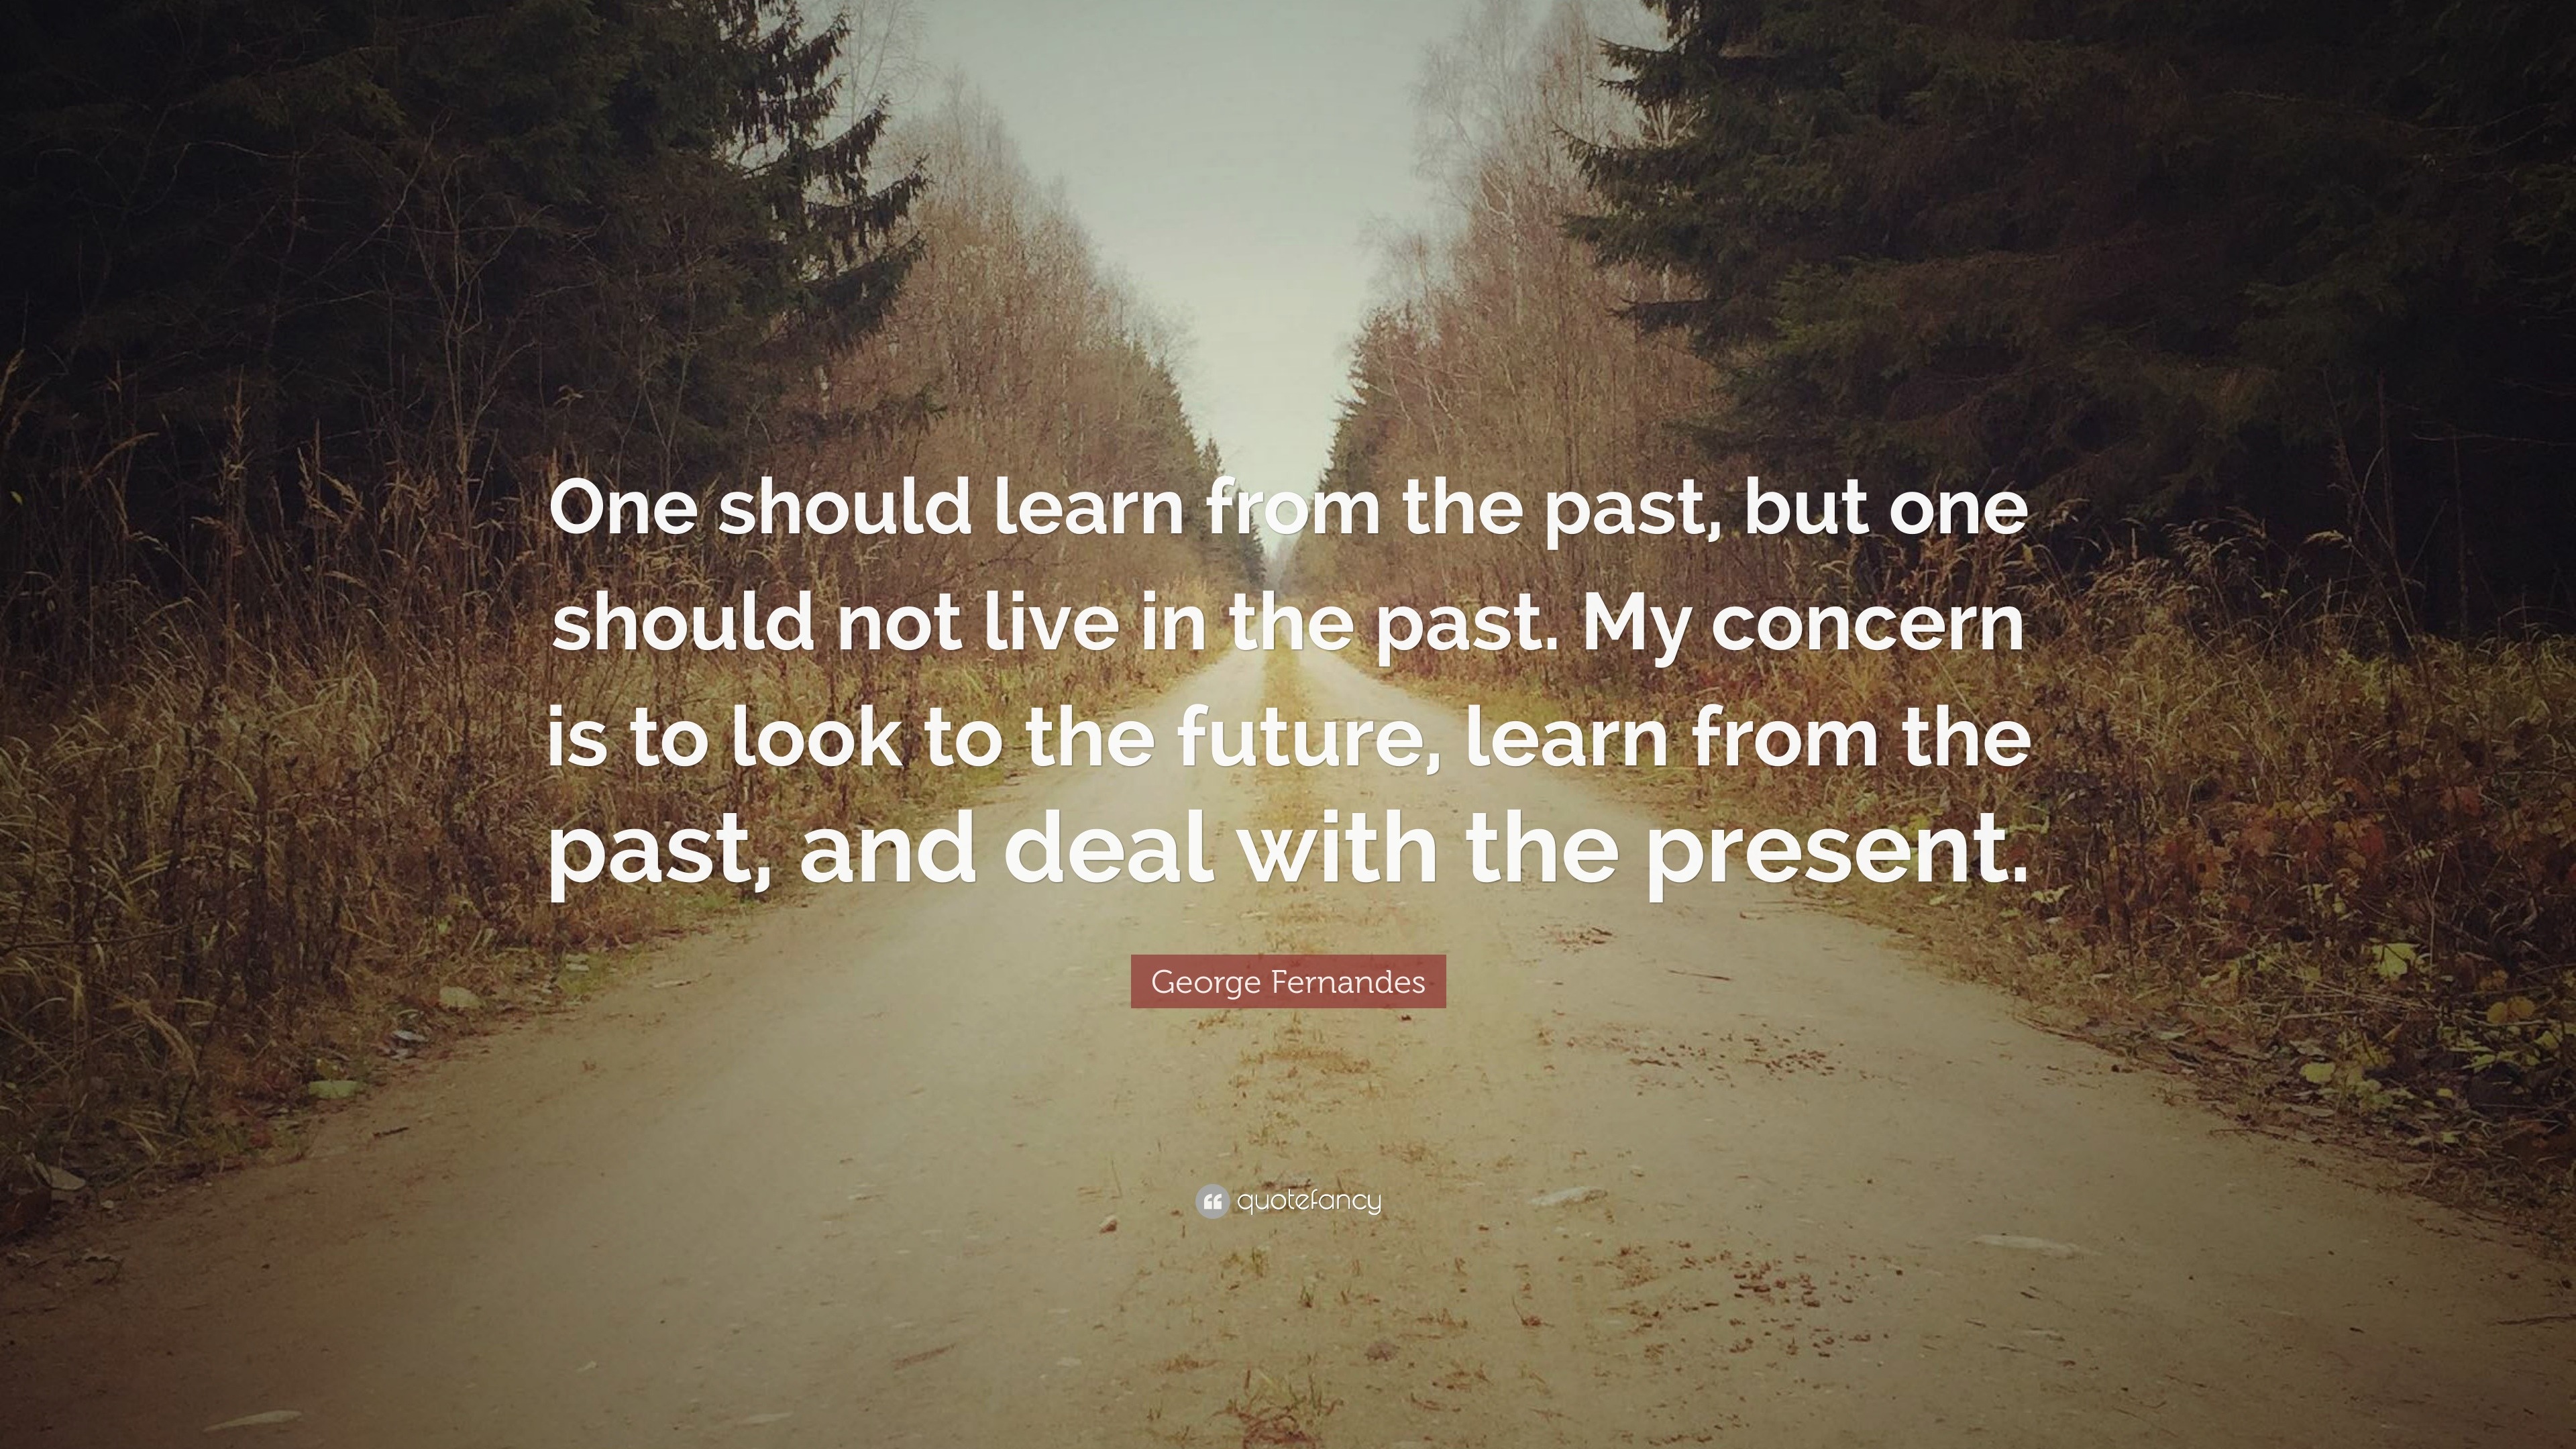 Quote: Learn from the past, look to the future, but live in the